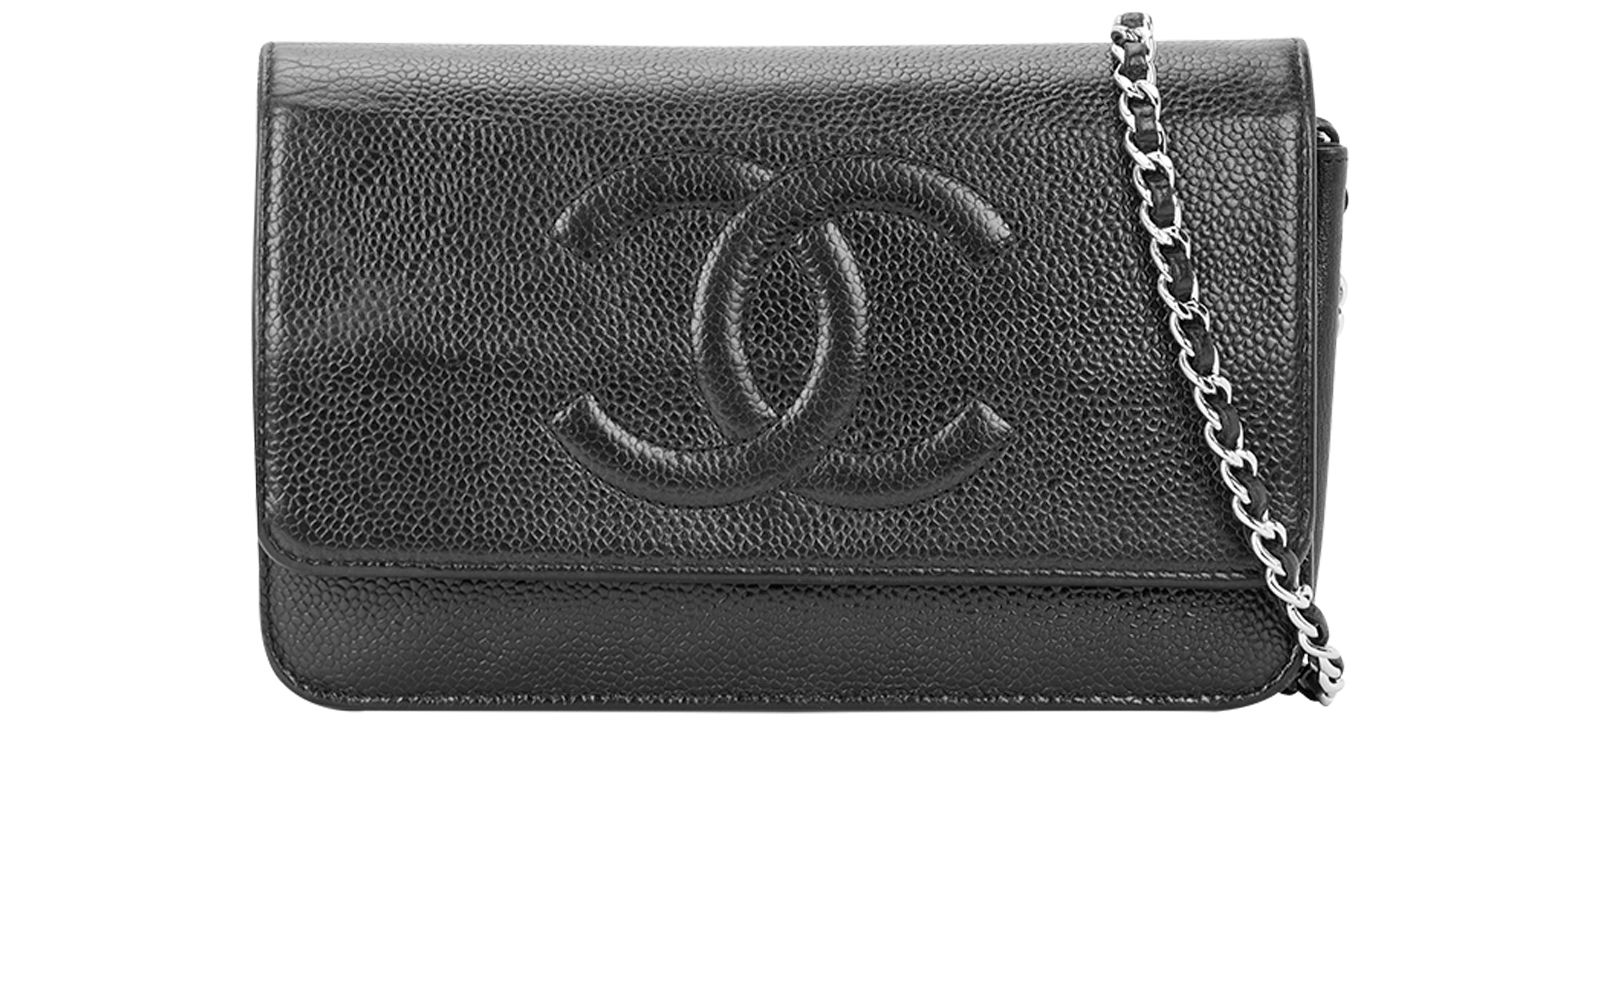 Chanel Timeless WOC – City Girl Consignment